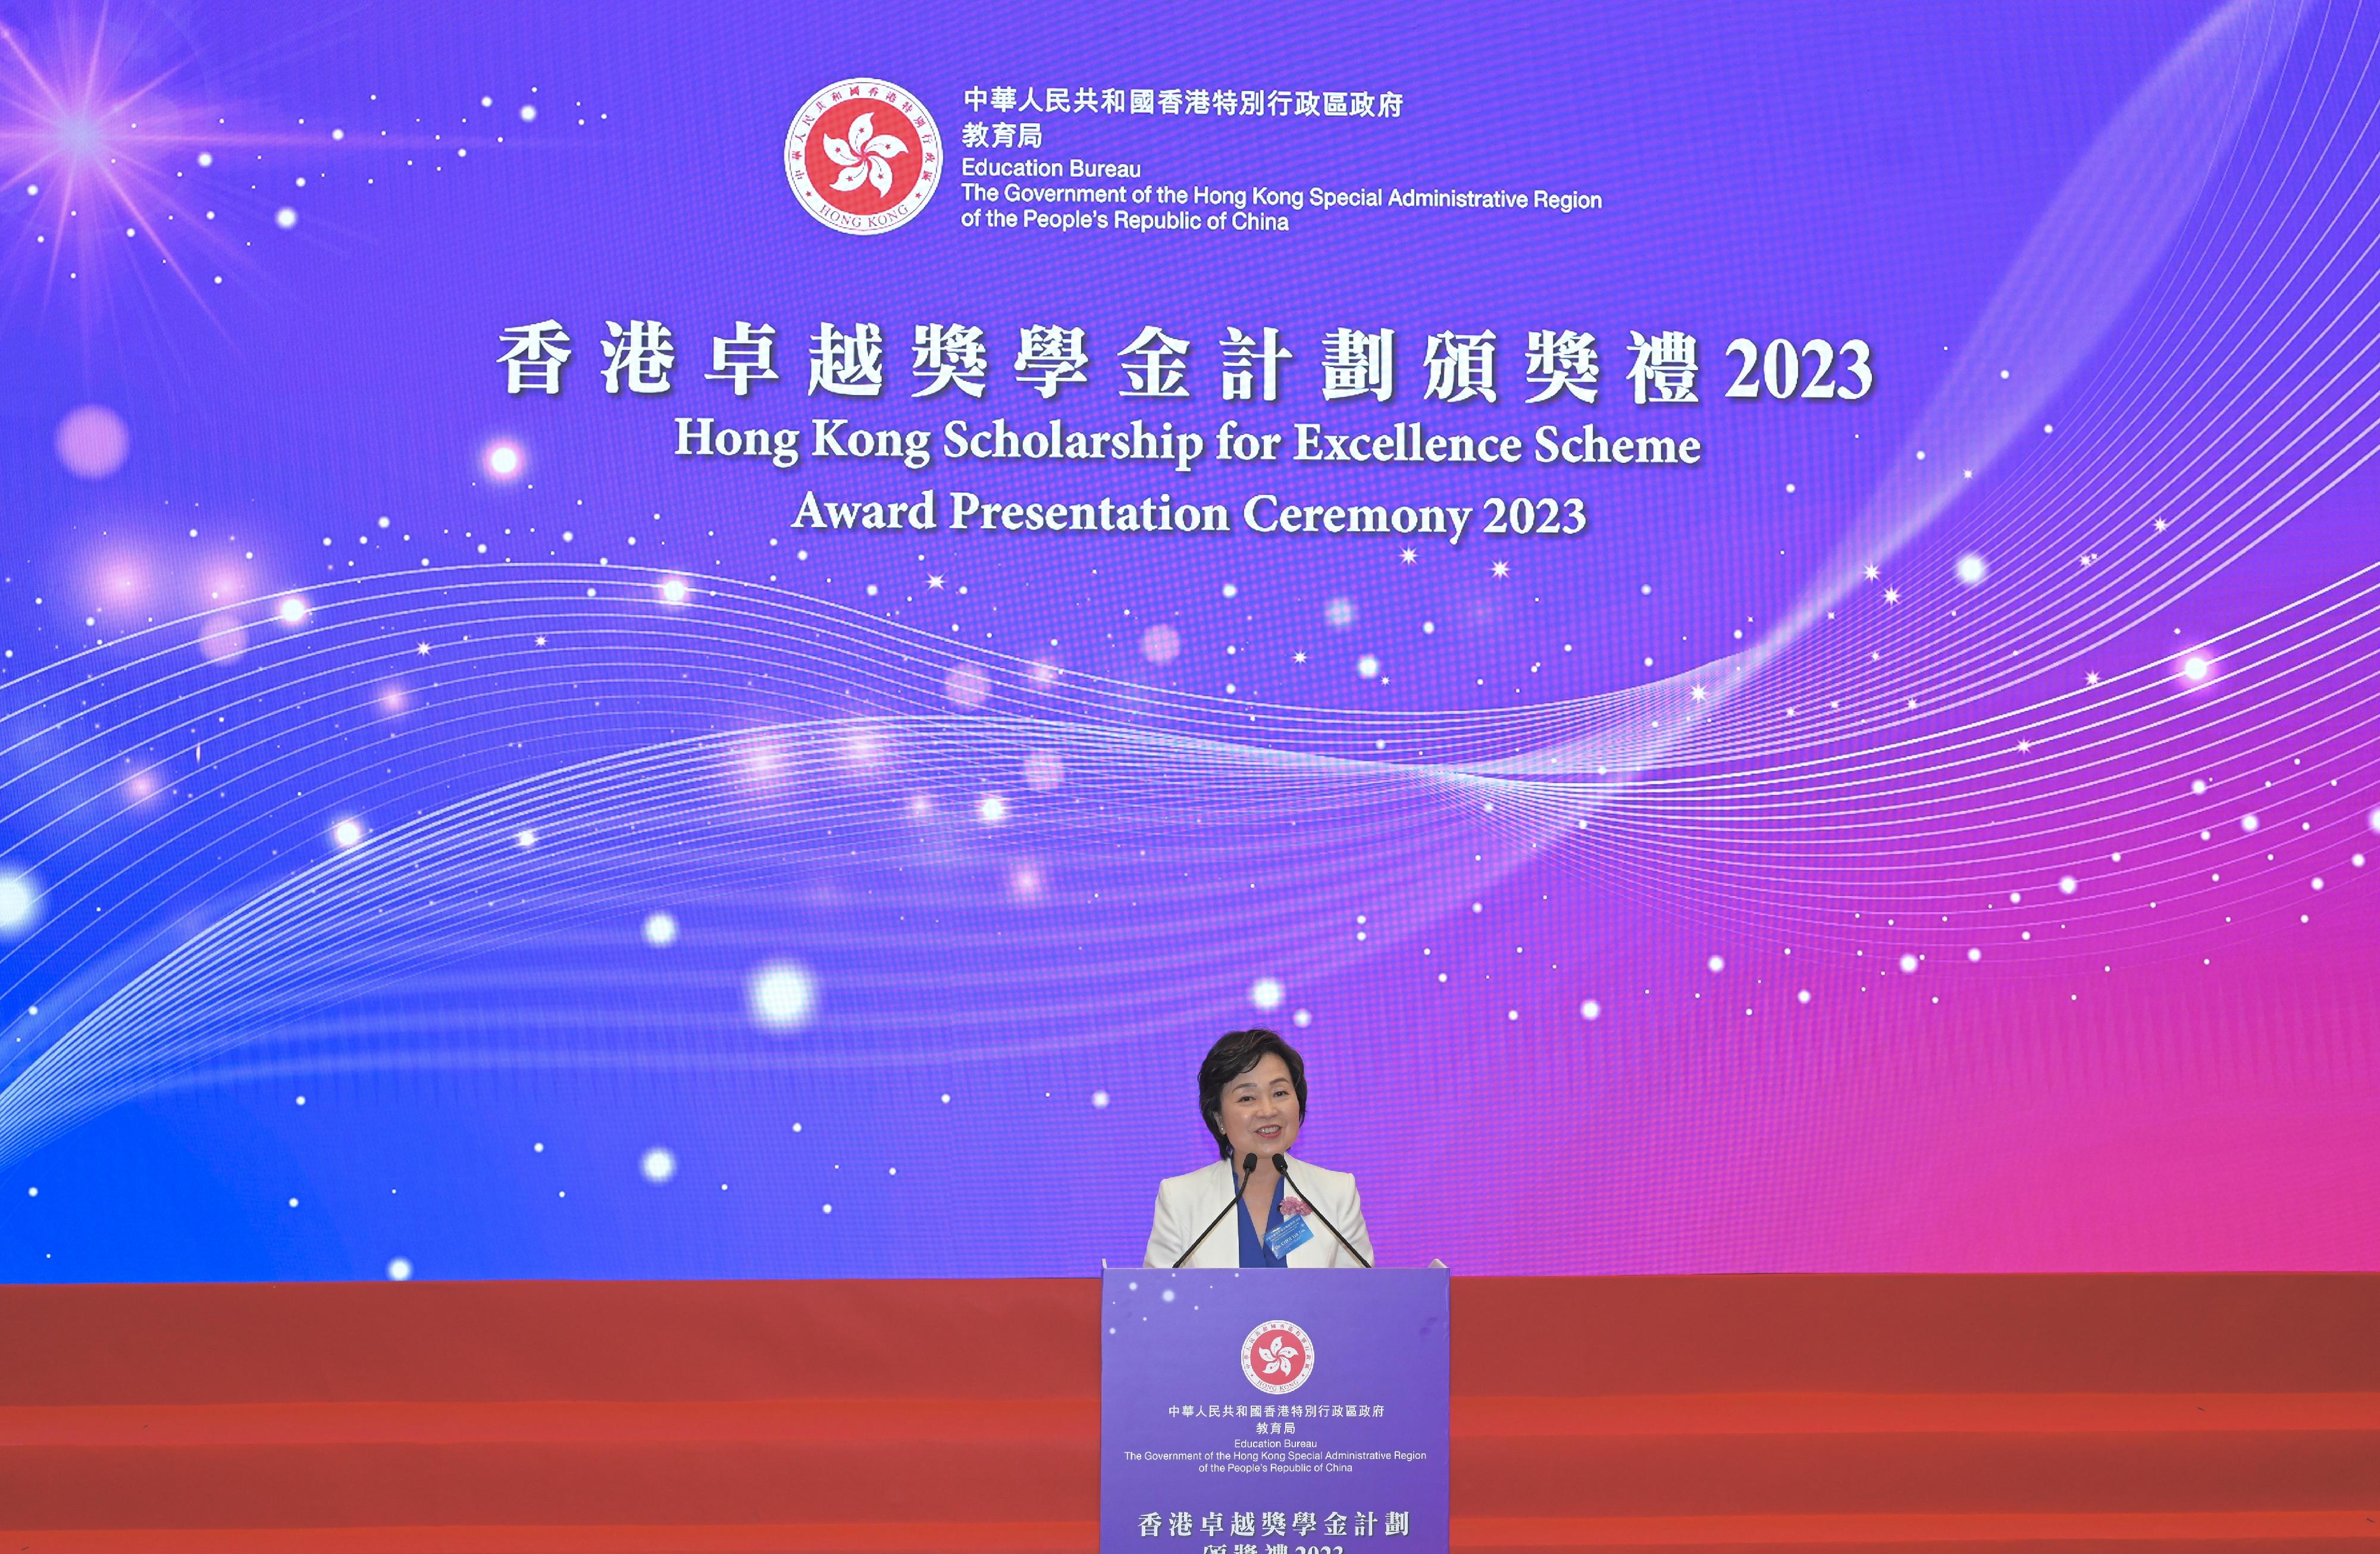 The Secretary for Education, Dr Choi Yuk-lin, speaks at the Award Presentation Ceremony 2023 of the Hong Kong Scholarship for Excellence Scheme today (August 25).